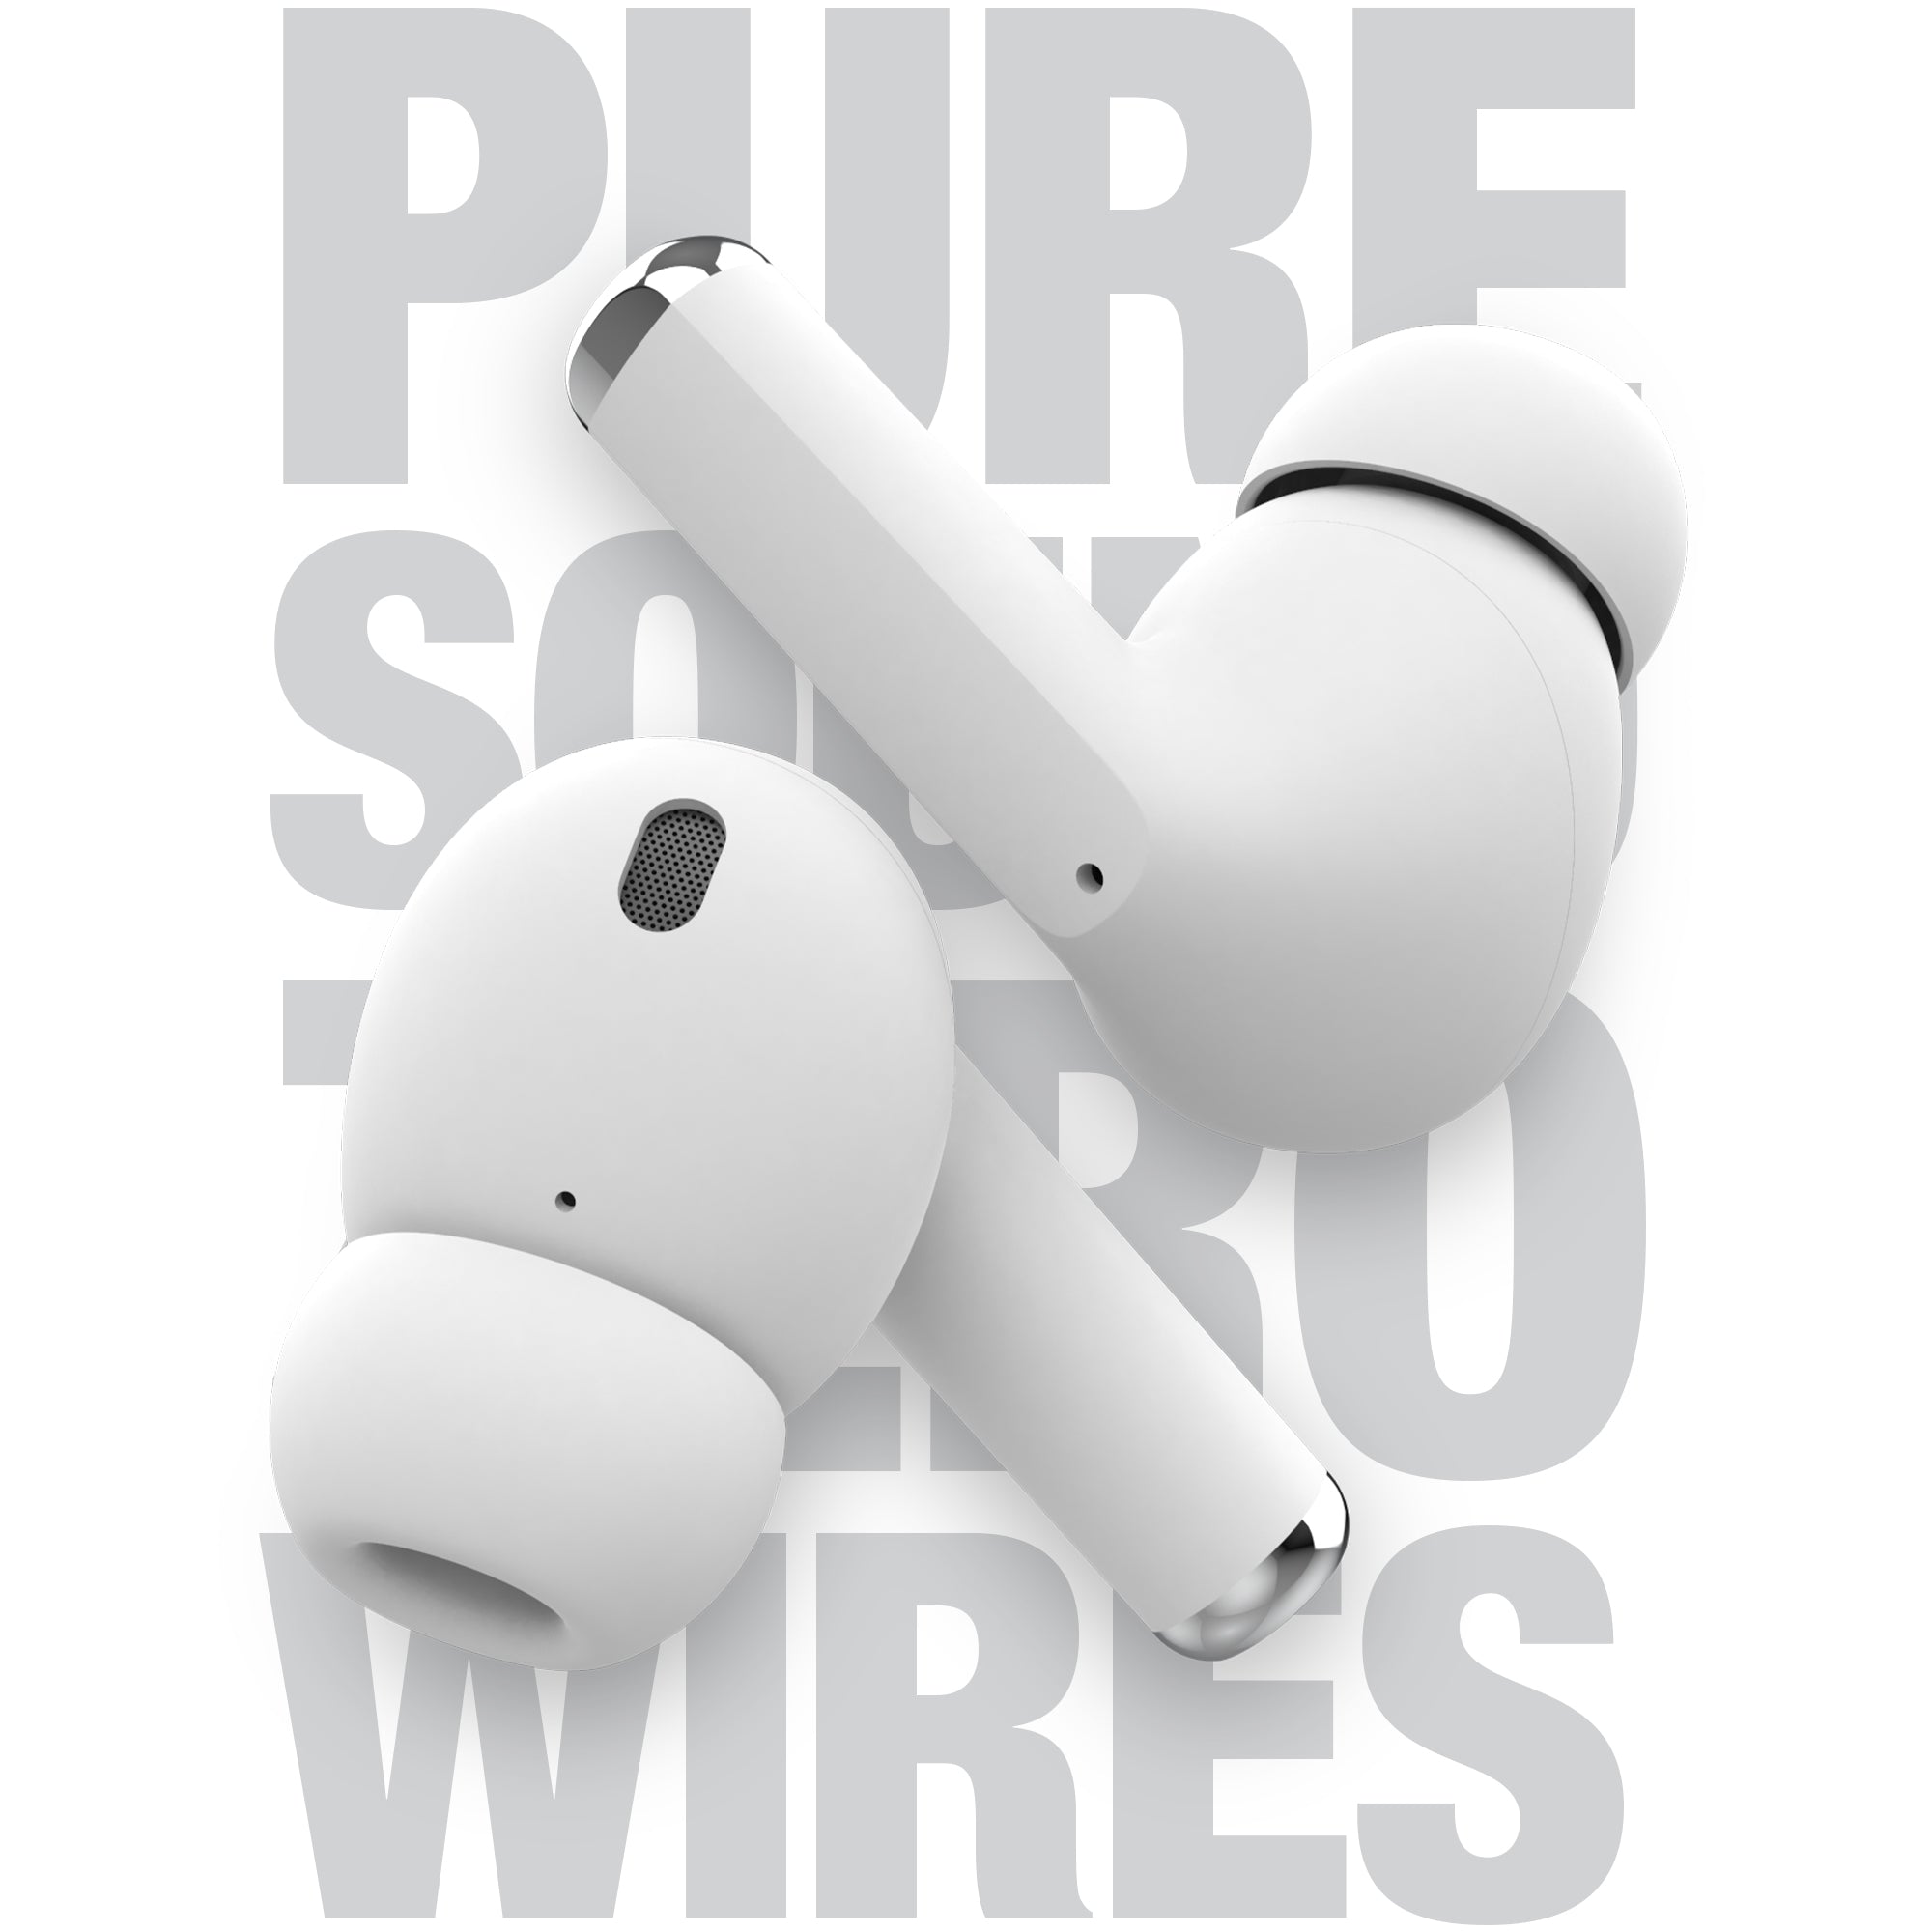 used Apple Wireless Charging Case for AirPods, White